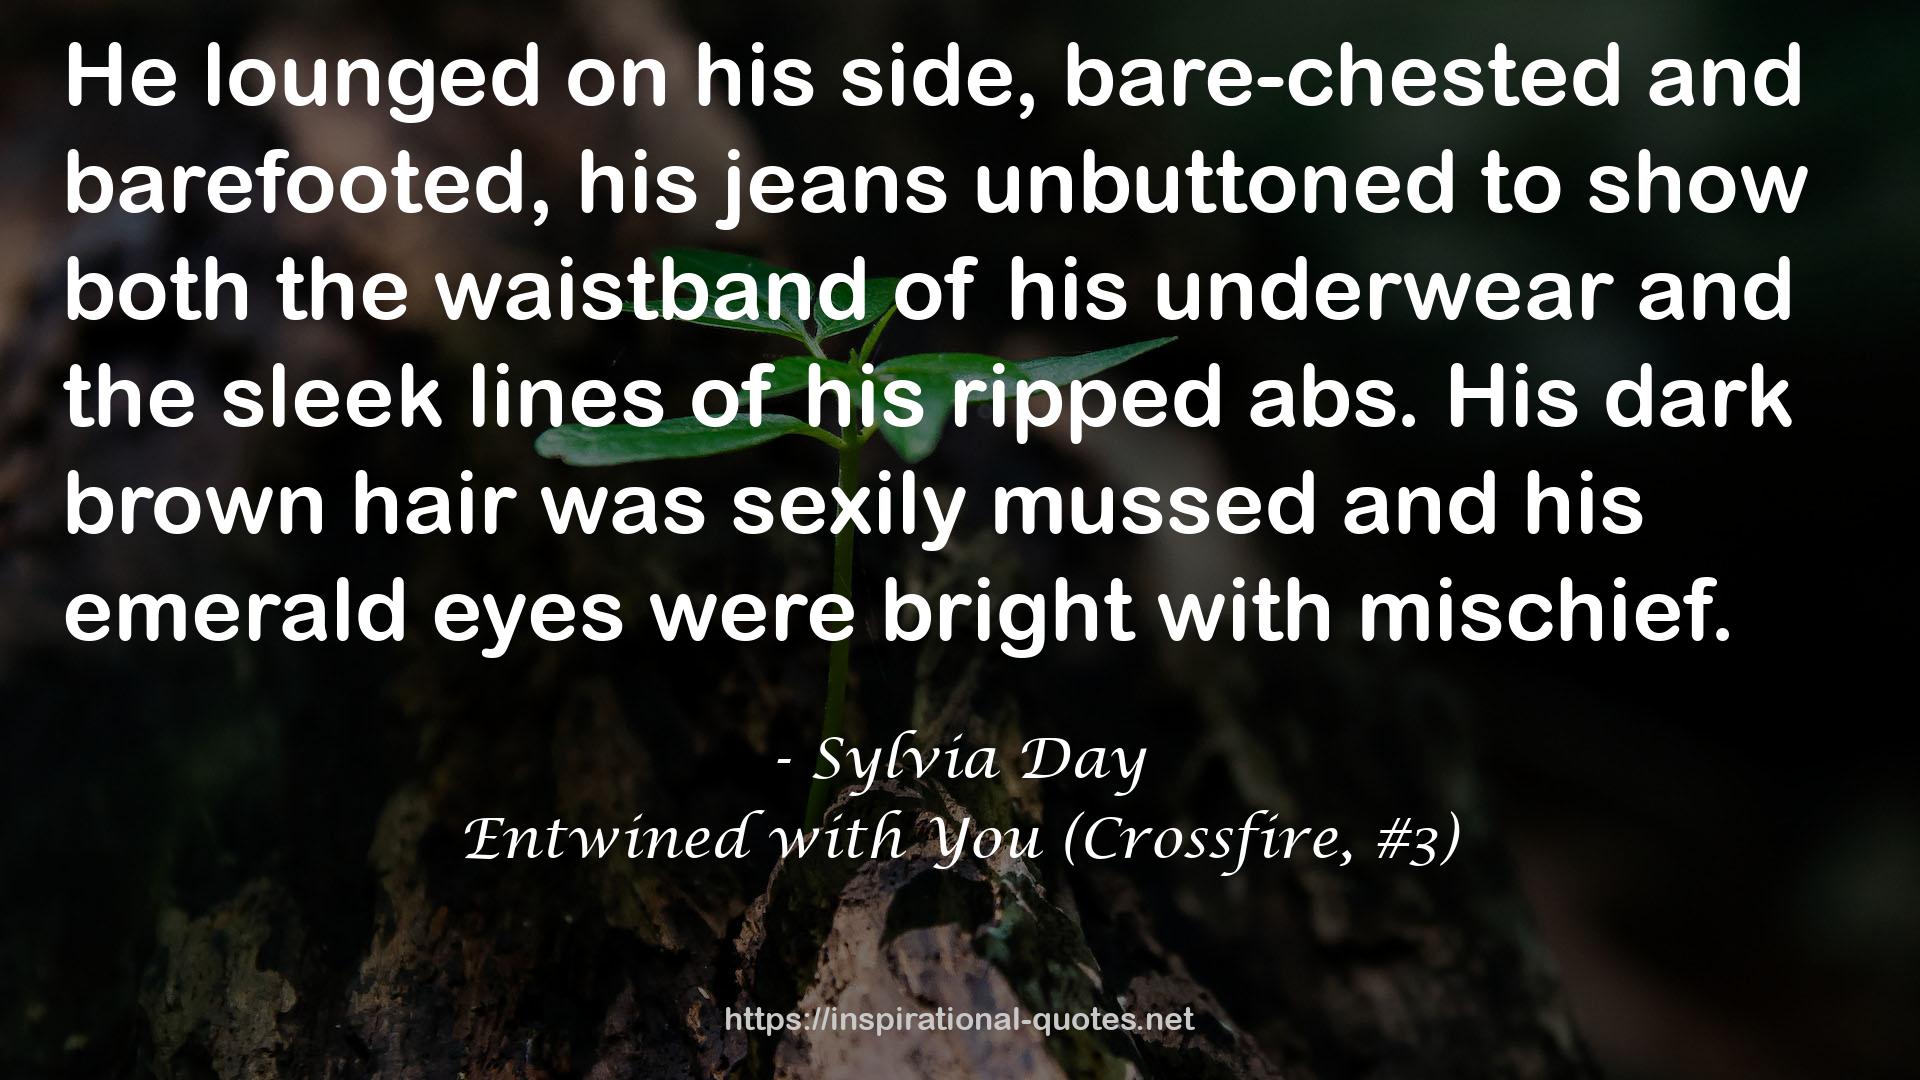 Entwined with You (Crossfire, #3) QUOTES